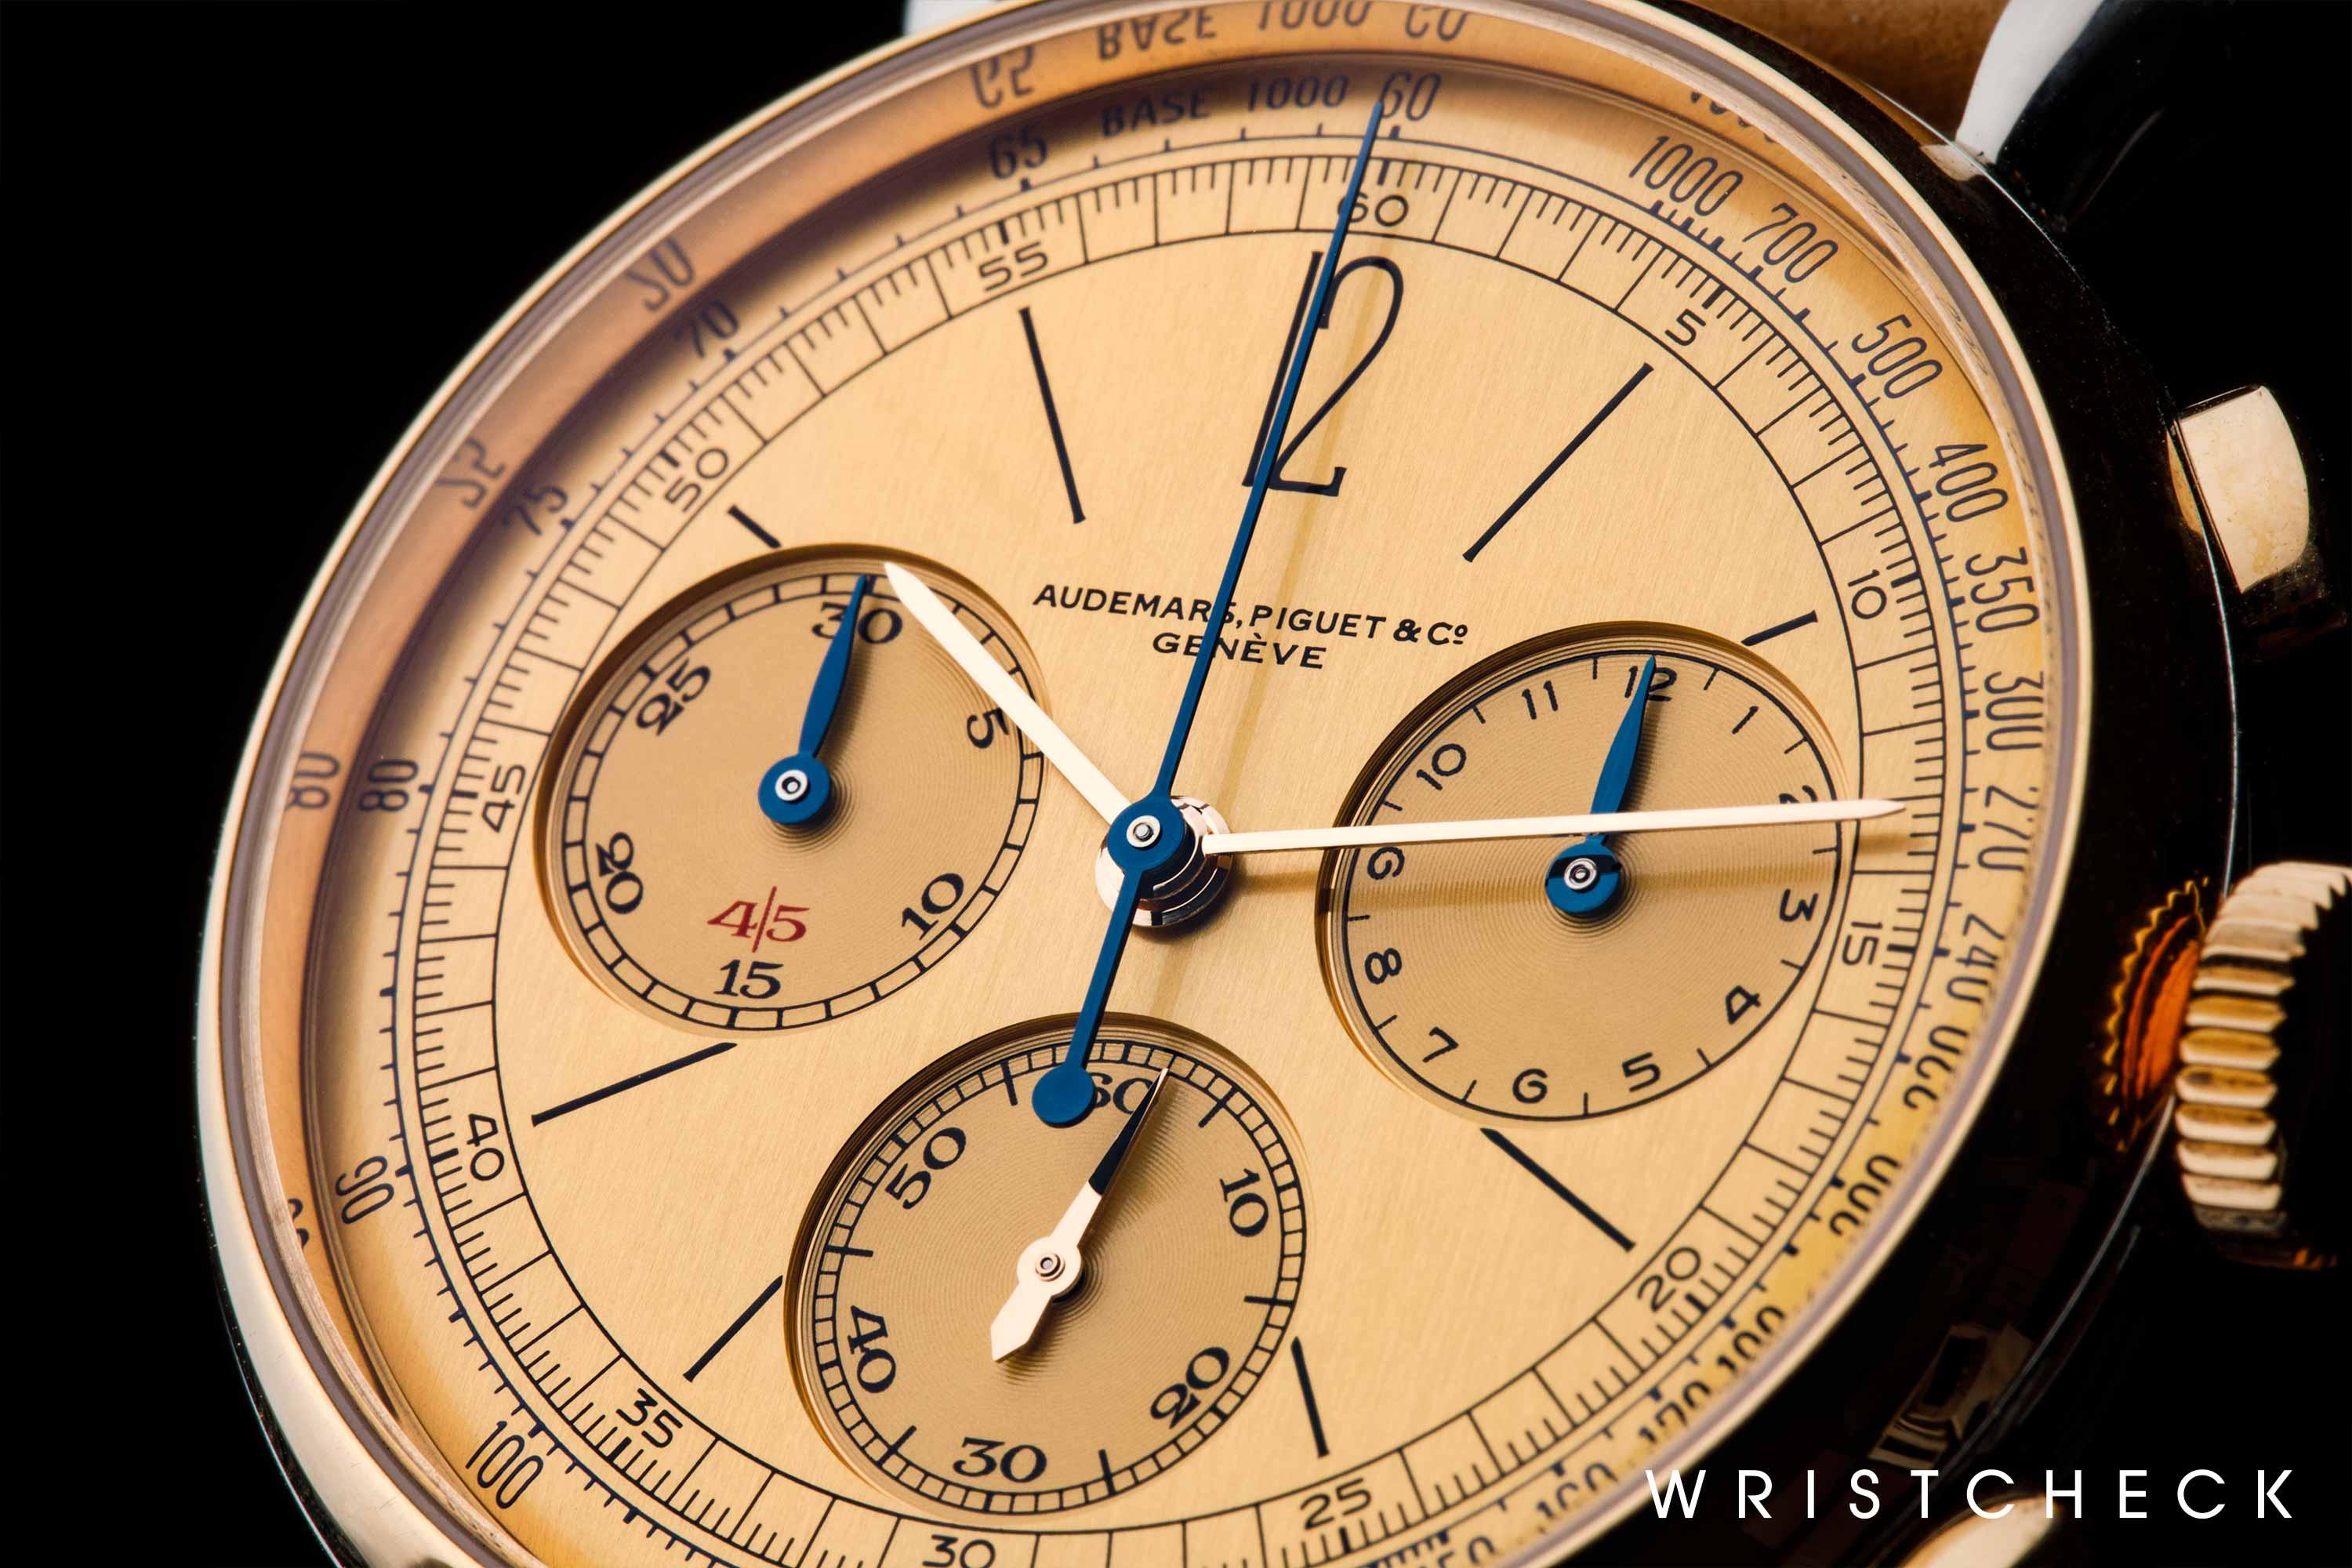 Contemporary expression of mid-century watchmaking